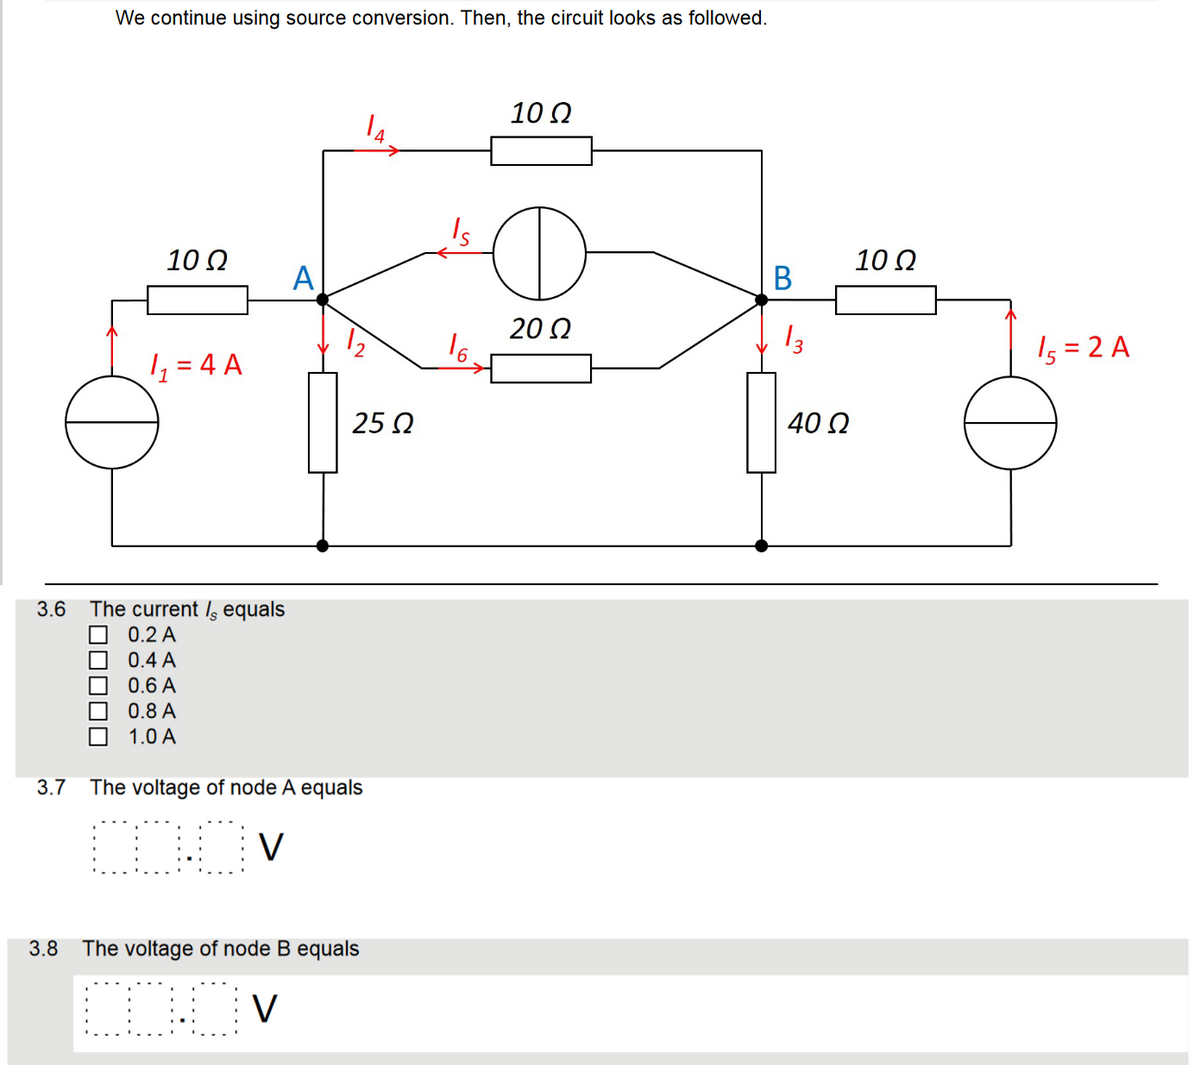 We continue using source conversion. Then, the circuit looks as followed.
10 Ω
1₁₂���=4 A
3.6 The current ls equals
0.2 A
0.4 A
0.6 A
0.8 A
1.0 A
A
25 Ω
3.7 The voltage of node A equals
[DOV
3.8 The voltage of node B equals
COOV
10 Ω
O
20 Ω
B
13
40 Ω
10 Ω
15 = 2 A